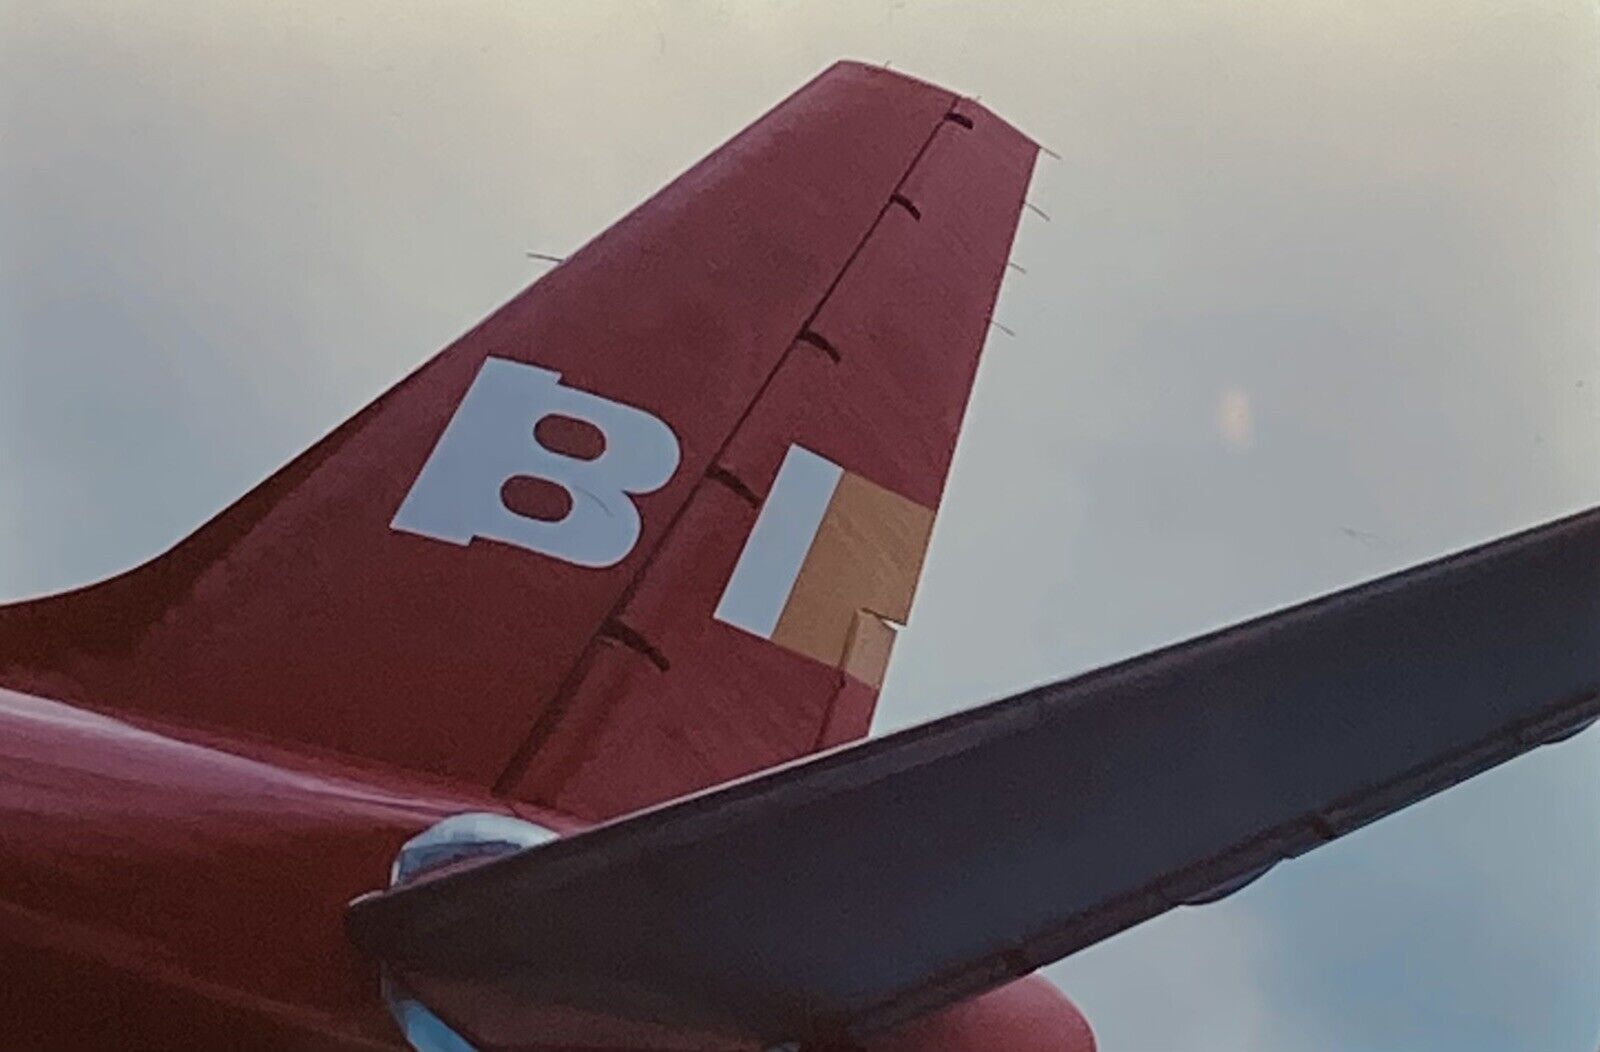 Braniff Airline Photo Slide Tail With BI On It Red Aircraft 1977 Vintage Pilot